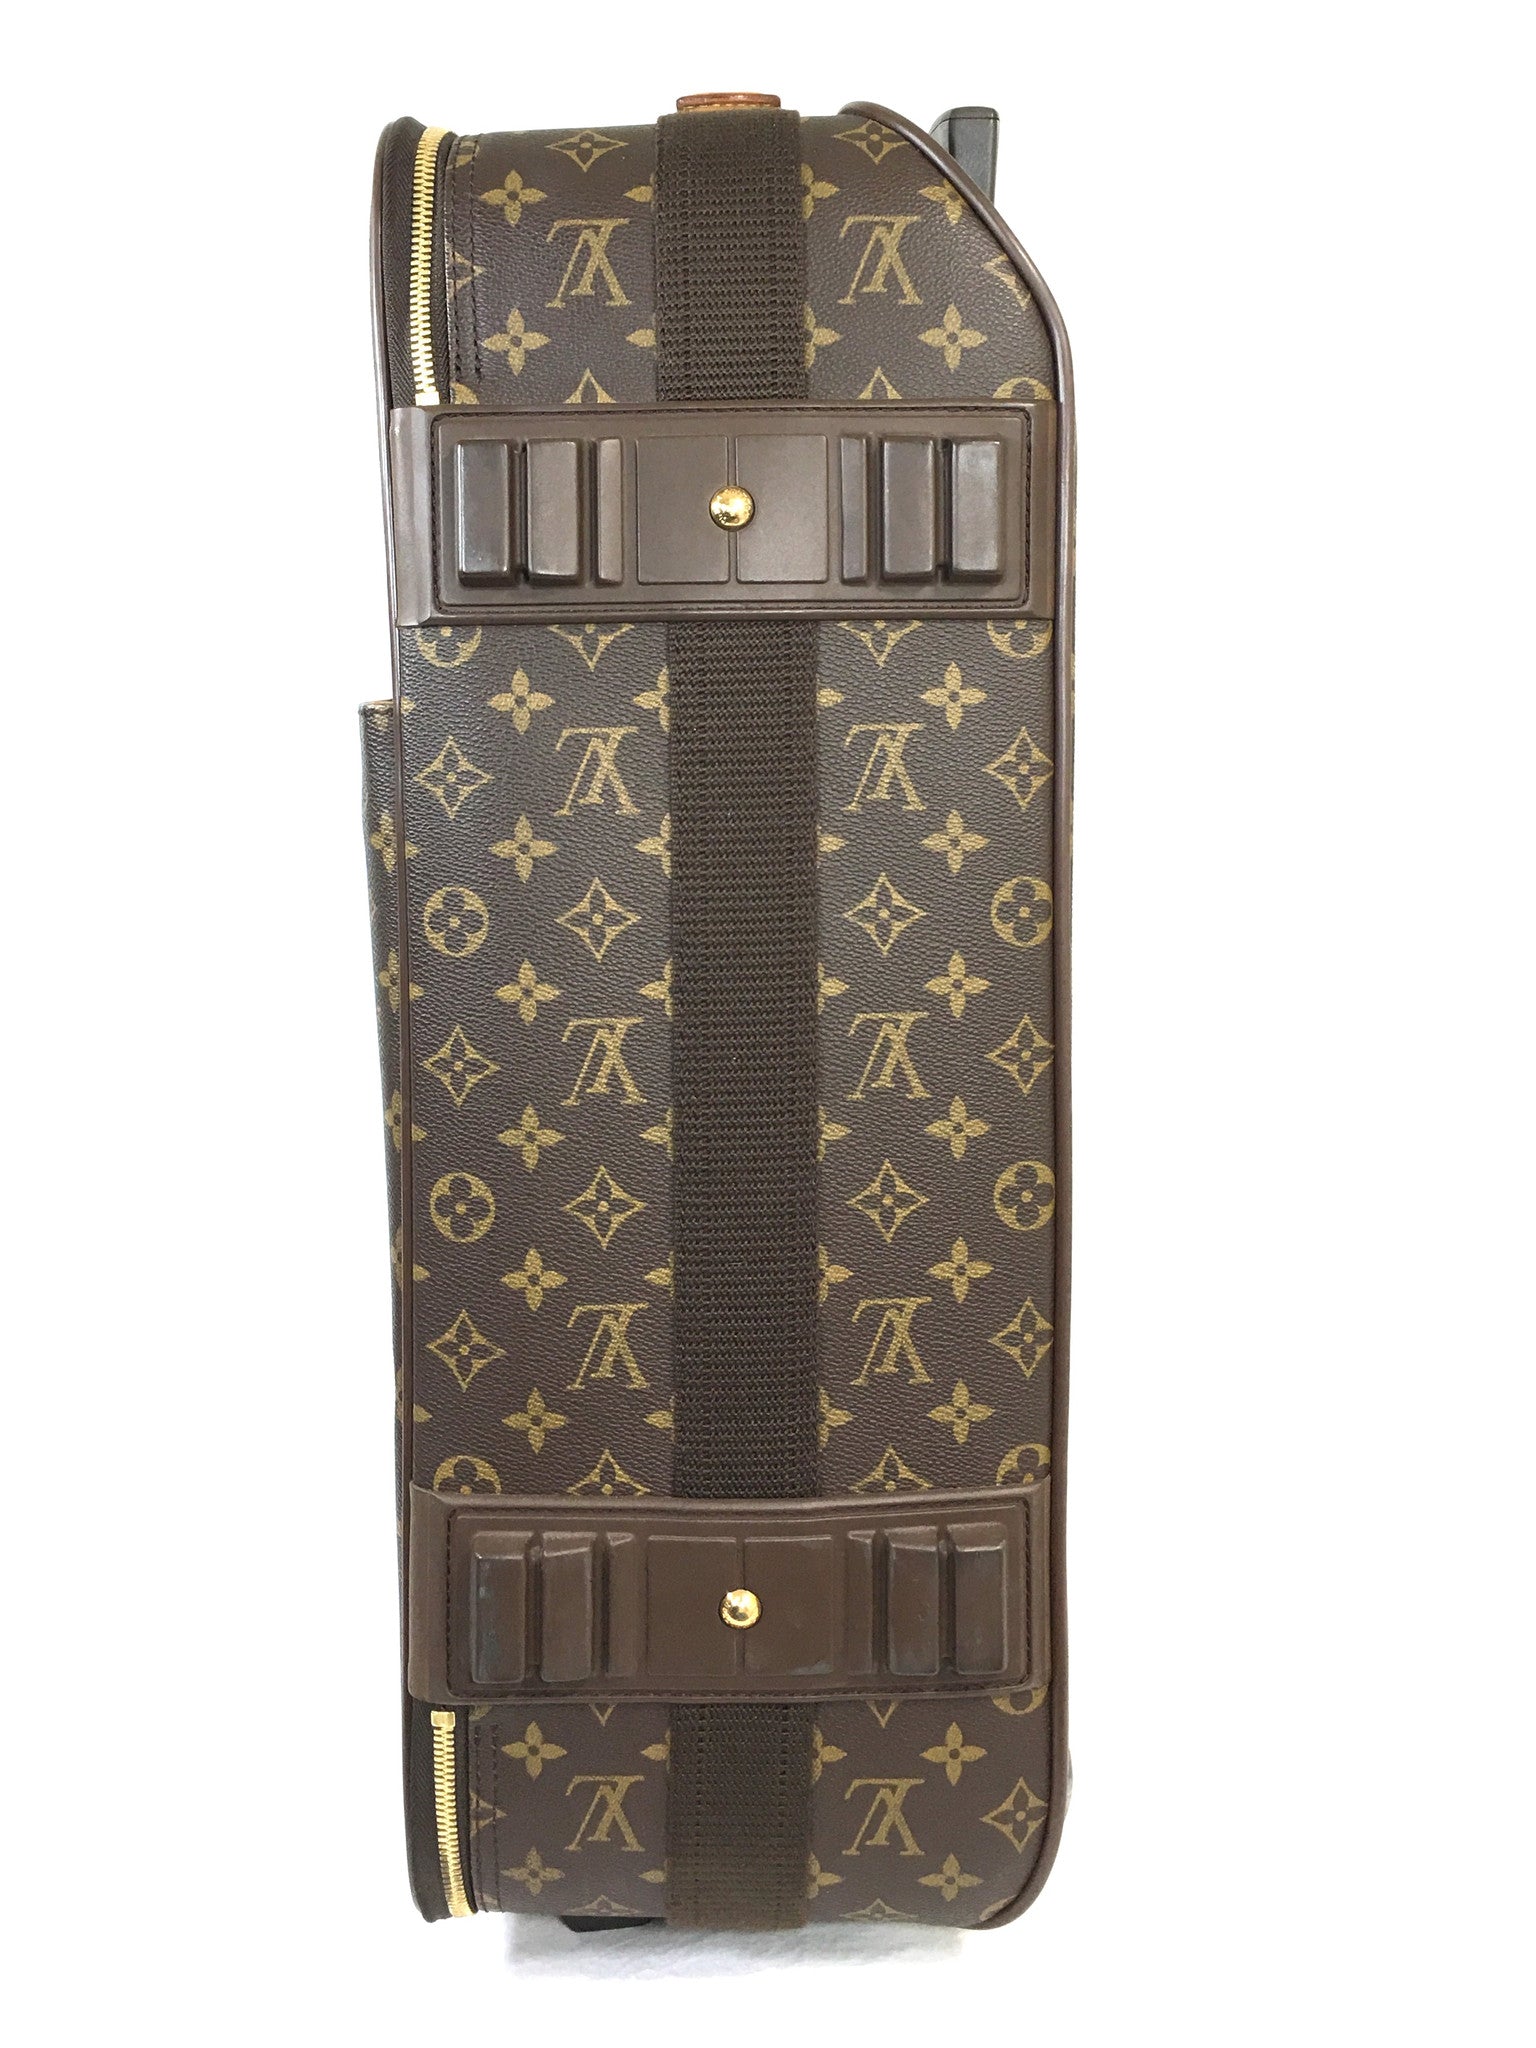 LV Horizon 55 Suitcase Reveal - 35 pics! Comparisons to Pegase 45 /  Samsonite and stacked with ICare